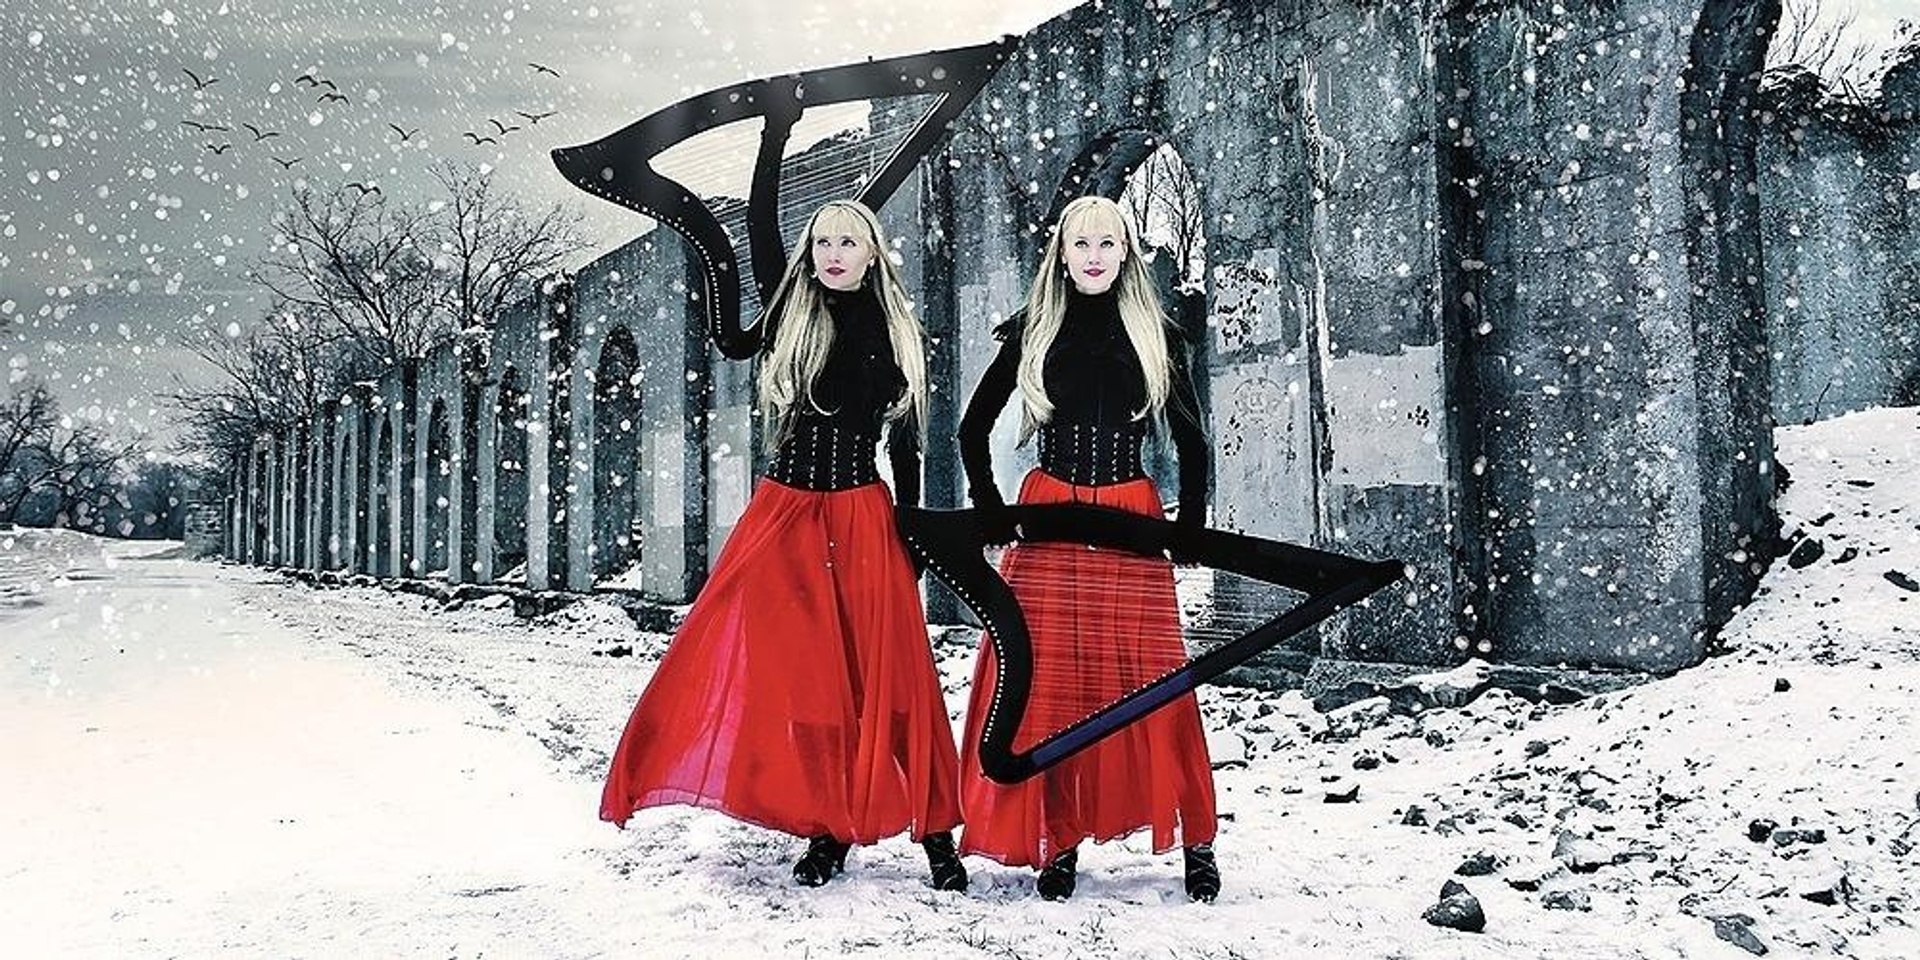 An Evening with Harp Twins